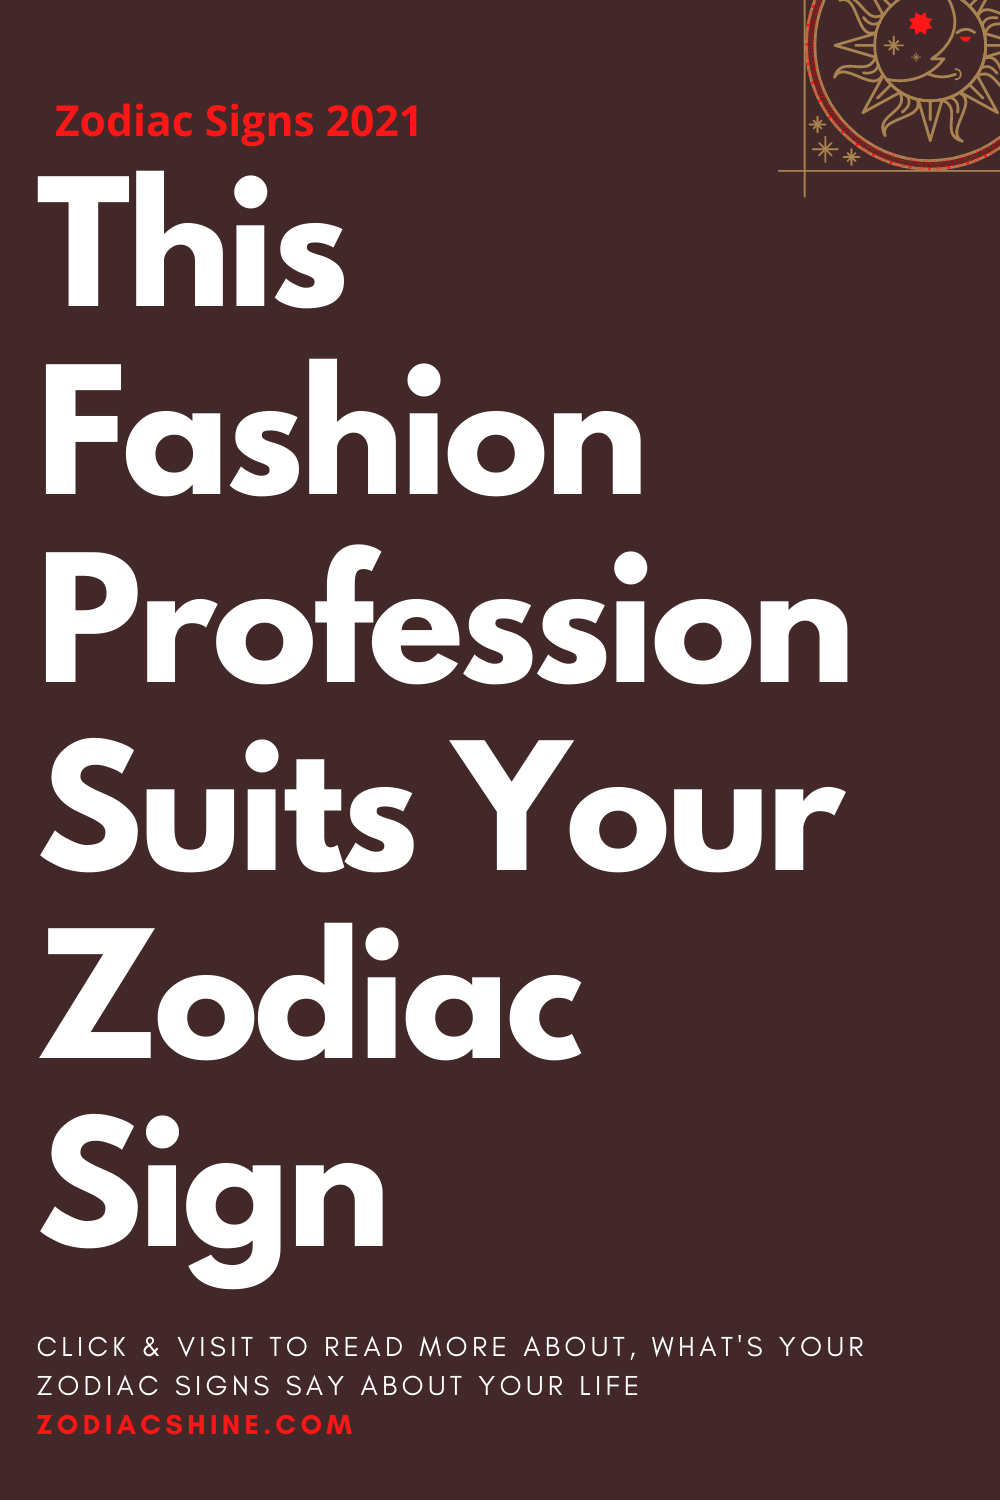 This Fashion Profession Suits Your Zodiac Sign